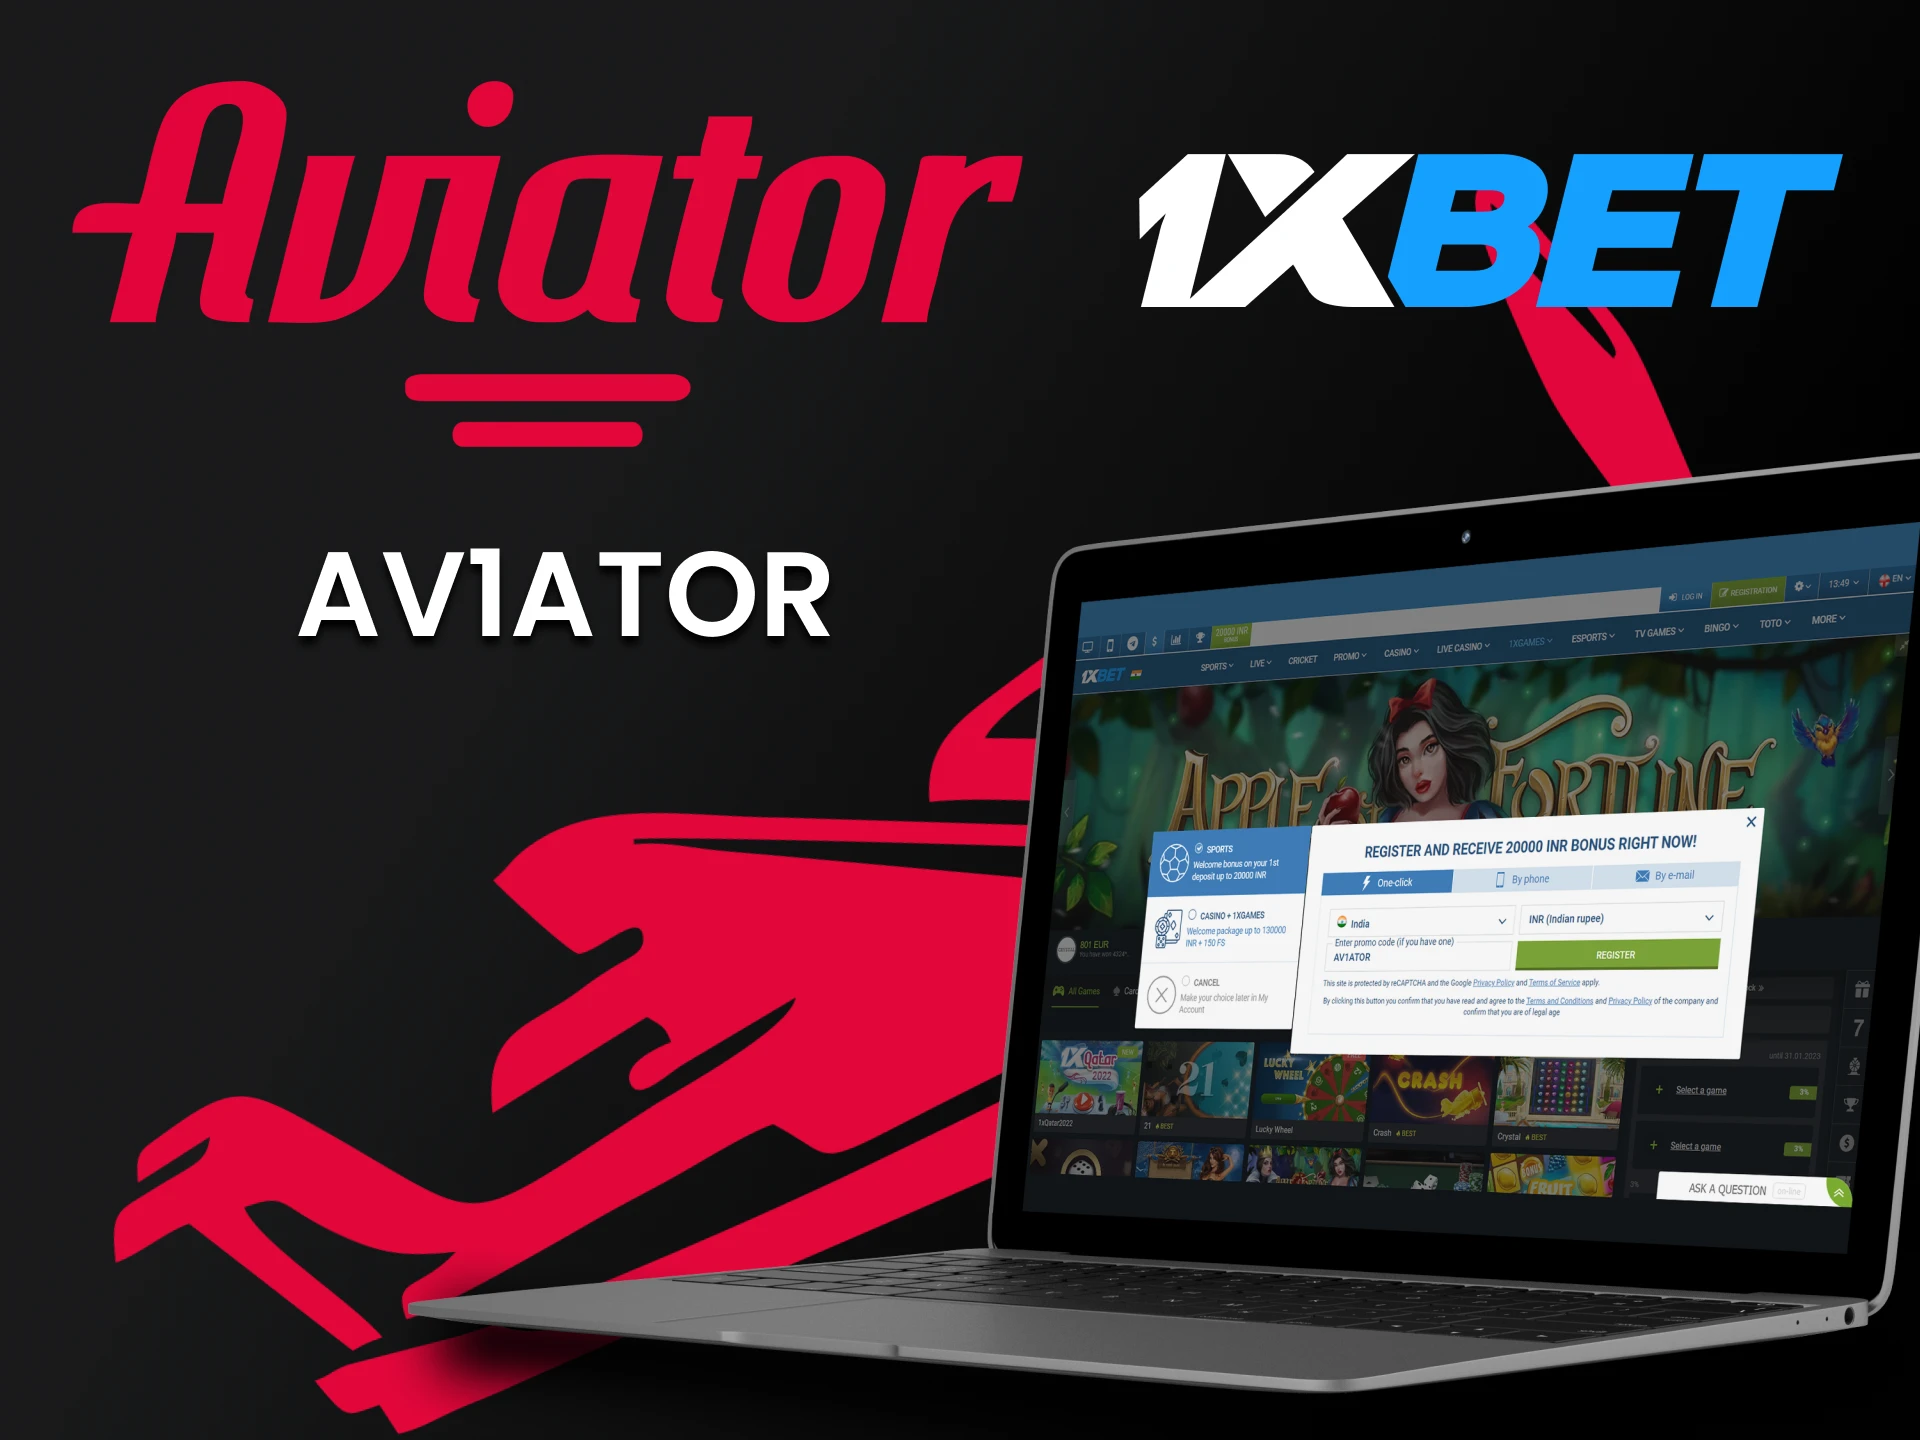 Use the promo code from 1xbet to play Aviator.